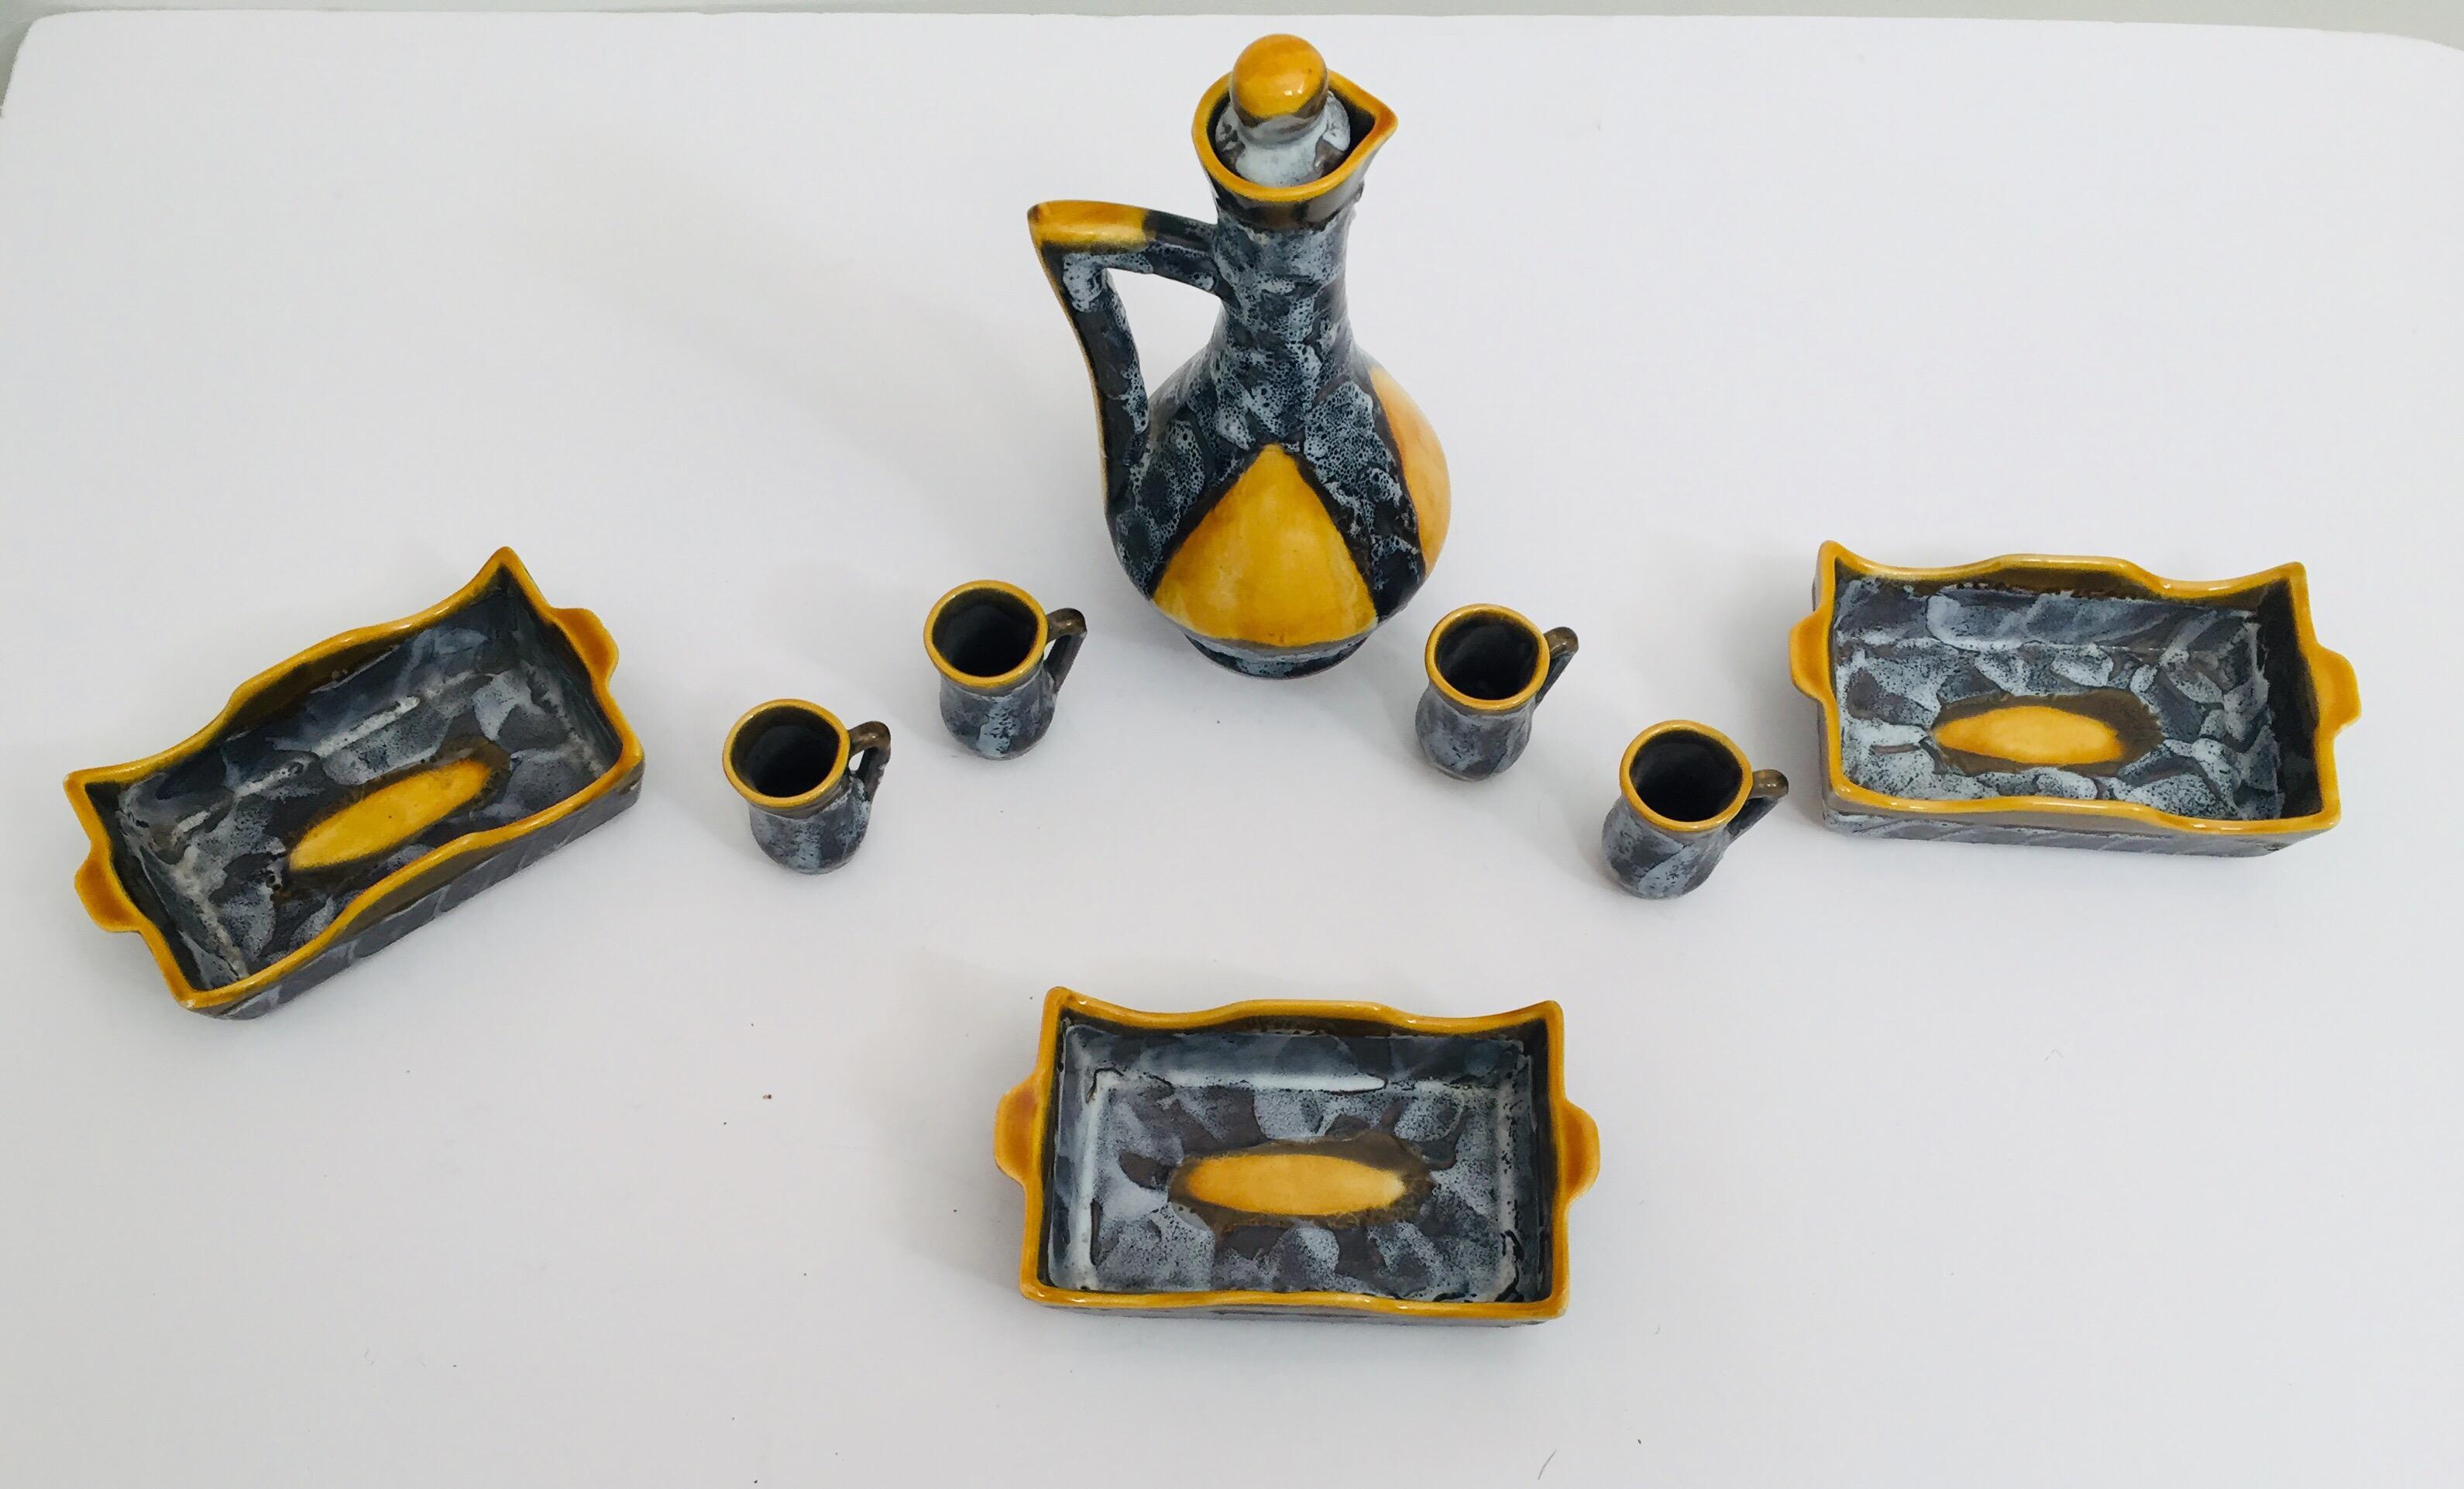 Vallauris Beautifully handcrafted ceramic drinking set in vibrant combination of colors for this great set with one pitcher pitcher, three rectangular shape bowls and six cups.
A stylish vintage midcentury French hand painted Vallauris pottery set